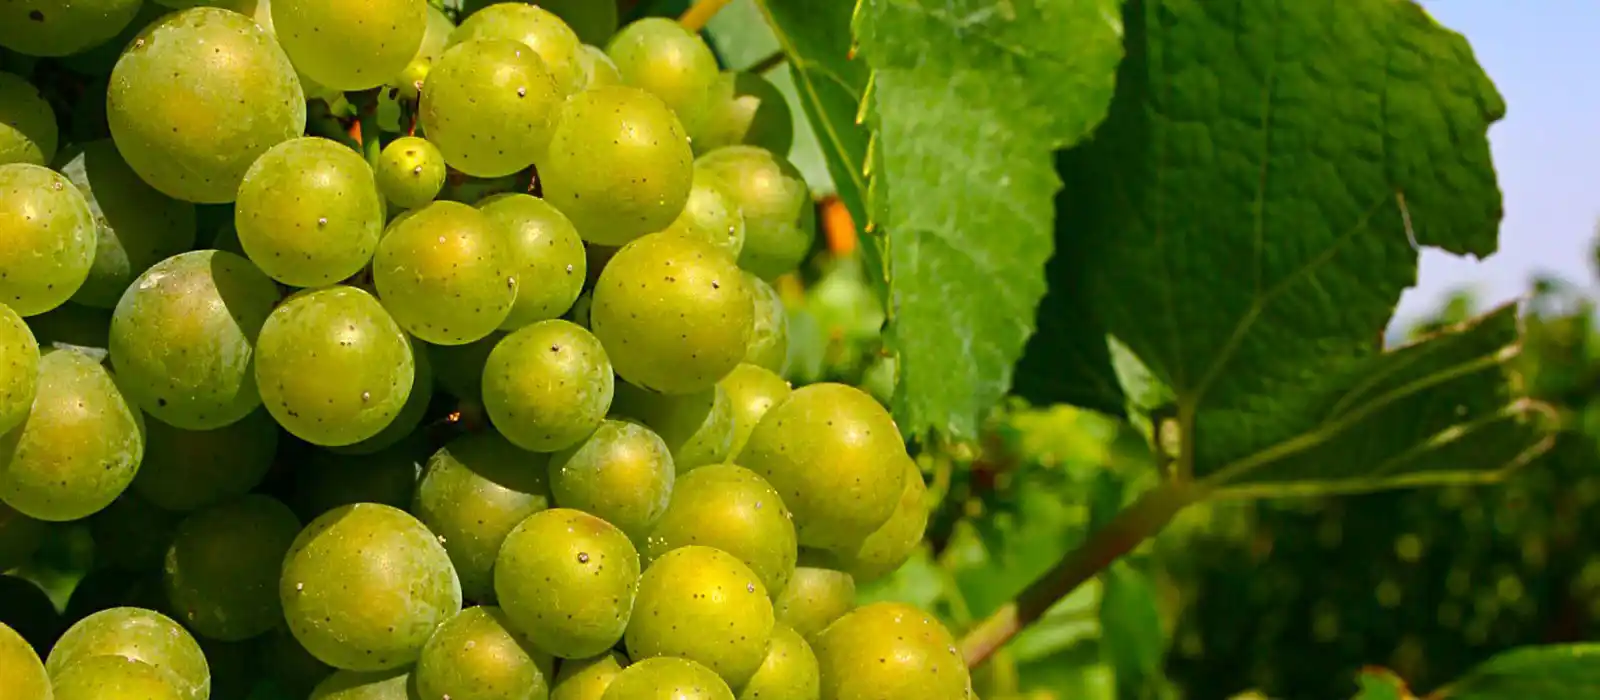 Grapes on the vine at a Sussex vineyard